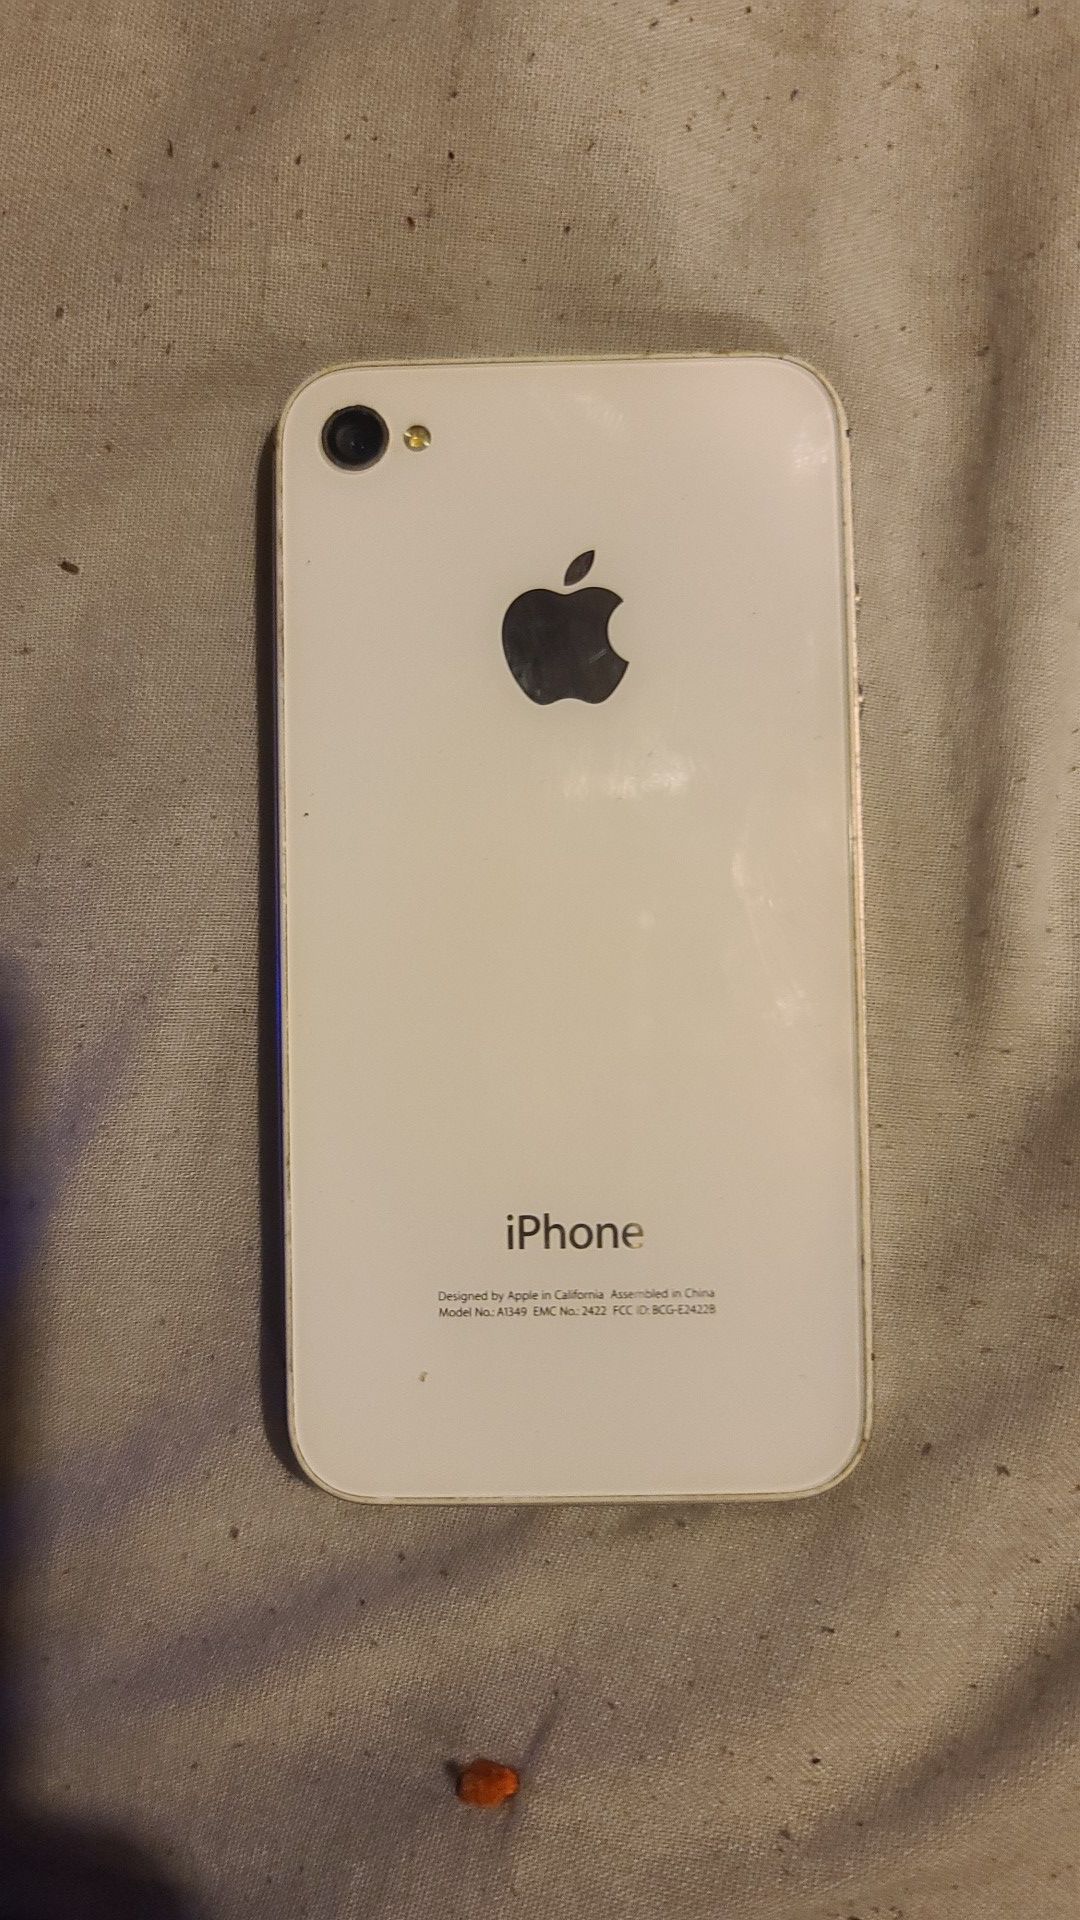 Apple IPhone 4 (Model: A1349 EMC 2422) [FOR PARTS]